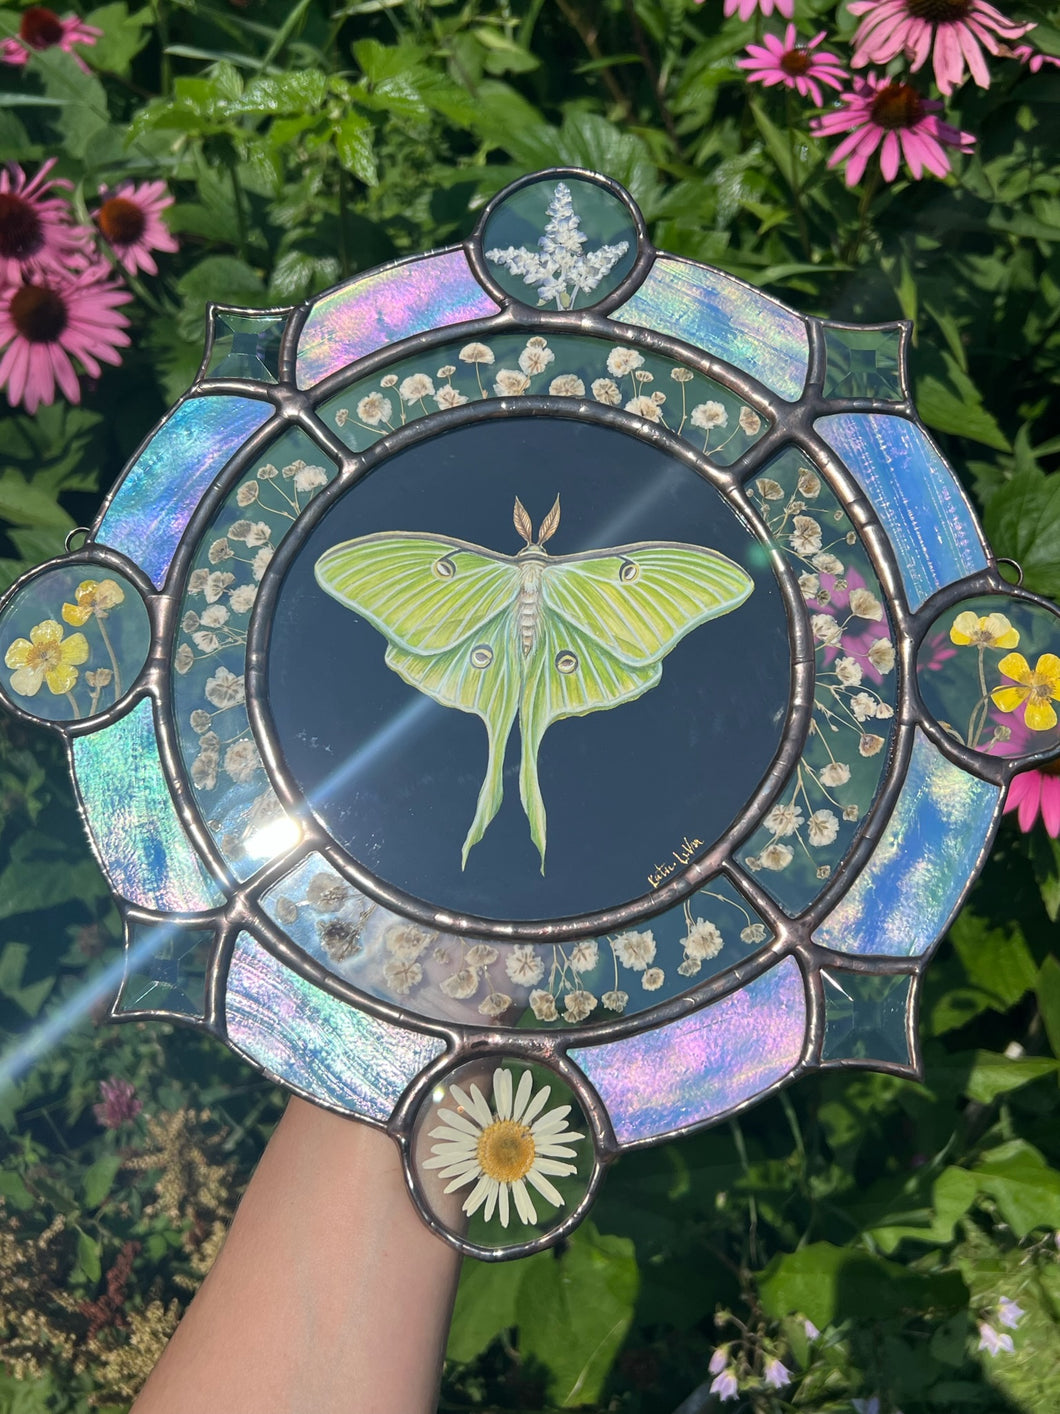 Gouache on paper, and flora set between glass with iridescent glass border in cool tones and bevels. Medallion shape with three rungs - center is painted green Luna moth on black background (circle shape), second ring is segmented circle of pressed gypsophila in clear glass, third and outer ring consists of alternating blue iridescent glass, circles with pressed flowers, and diamond bevels.